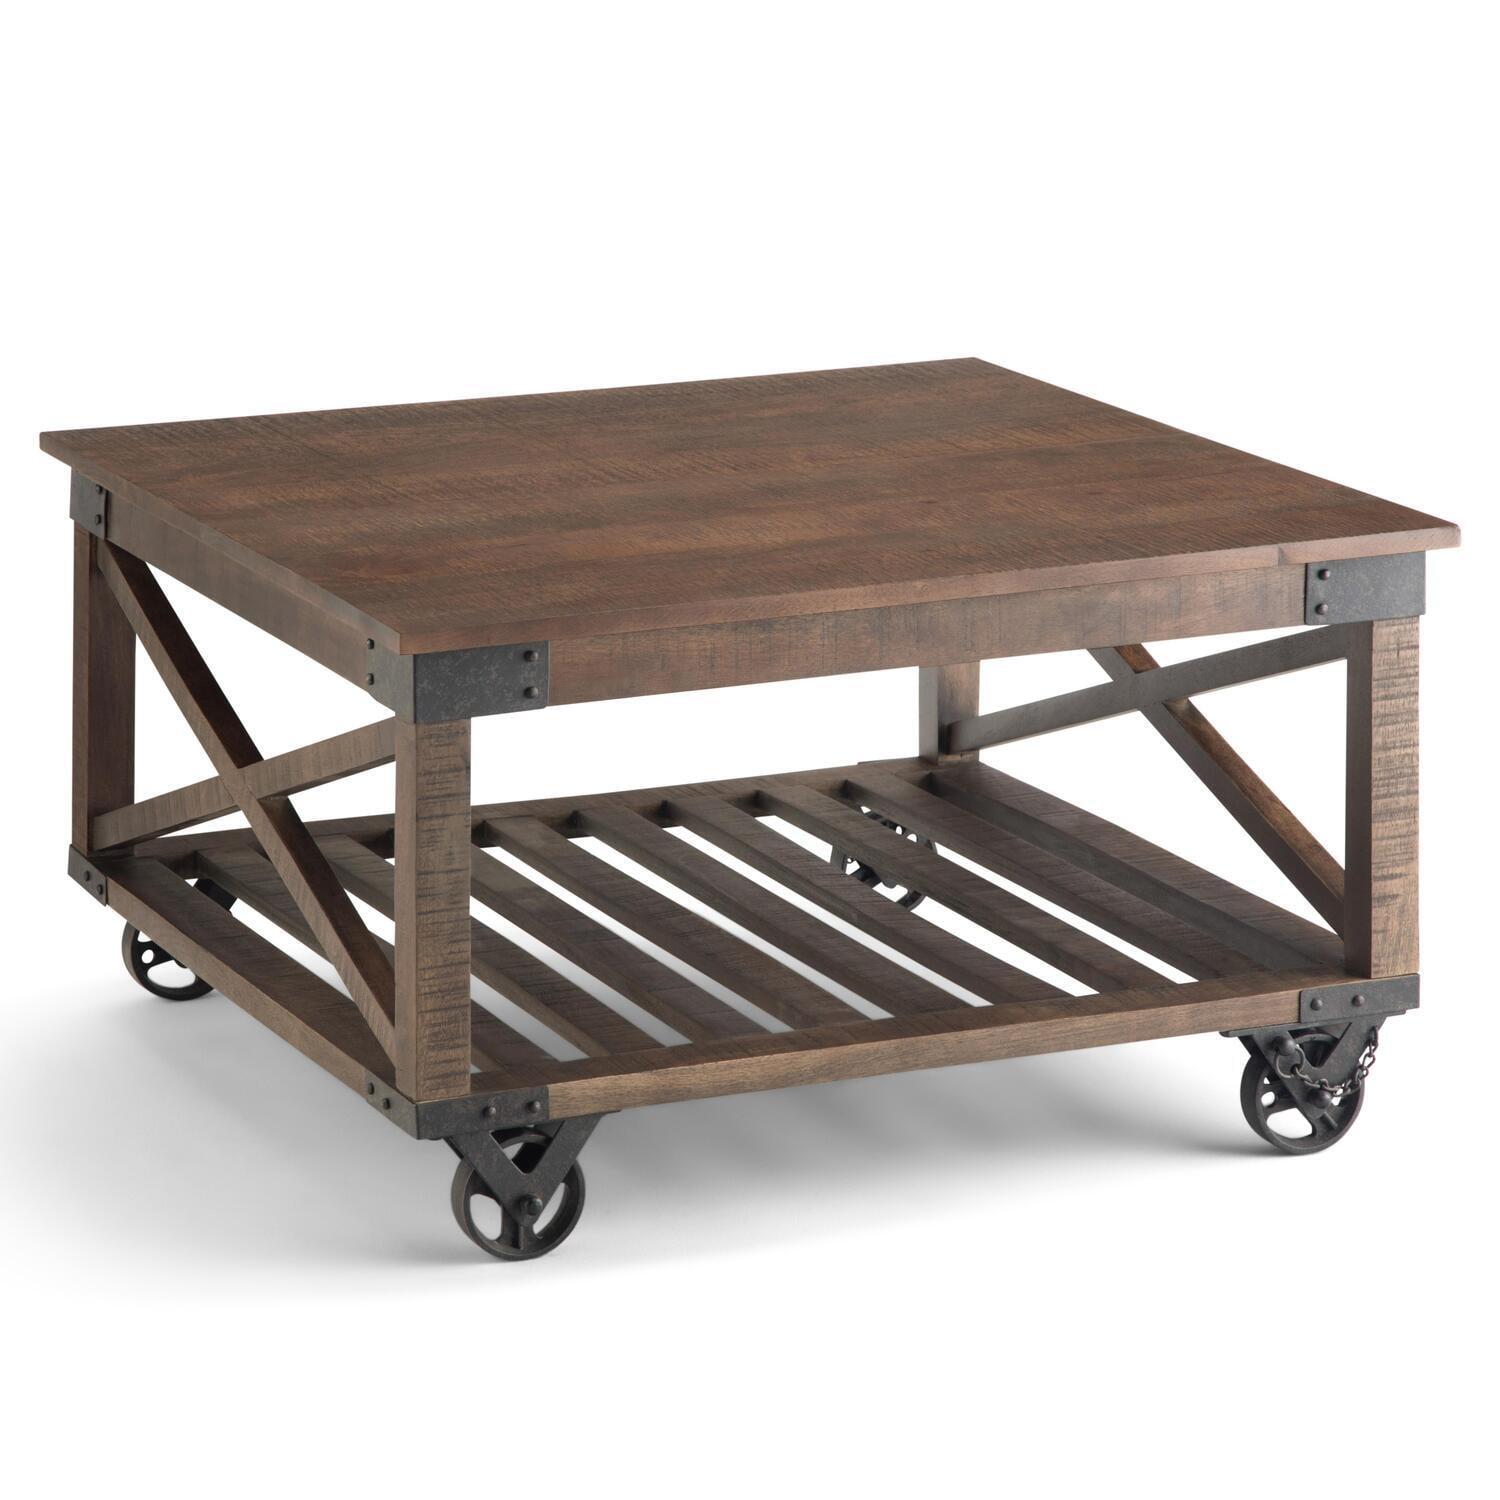 Harding Distressed Dark Brown Solid Mango Wood Square Coffee Table with Iron Wheels